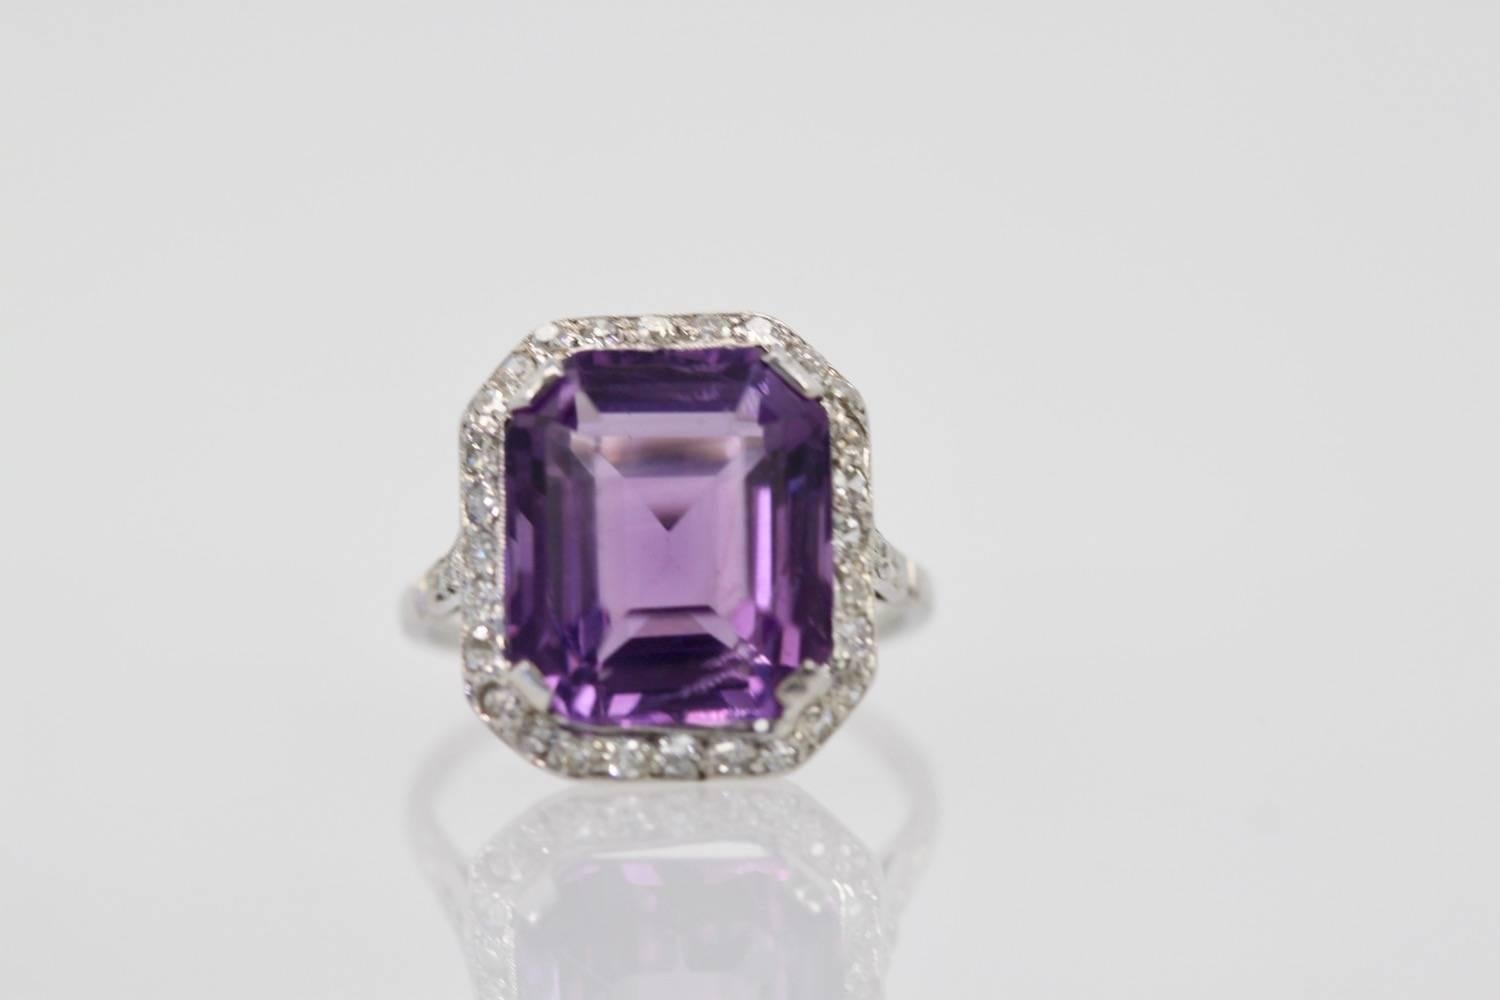 This Vintage Amethyst ring centers on a large 9.44 Carat Amethyst with a Diamond surround and border with 32 old cut diamonds G-I, SI Clarity. This ring was made around 1930 and is set in Platinum.  Lovely size 5.5 can be enlarged and weights 5.4